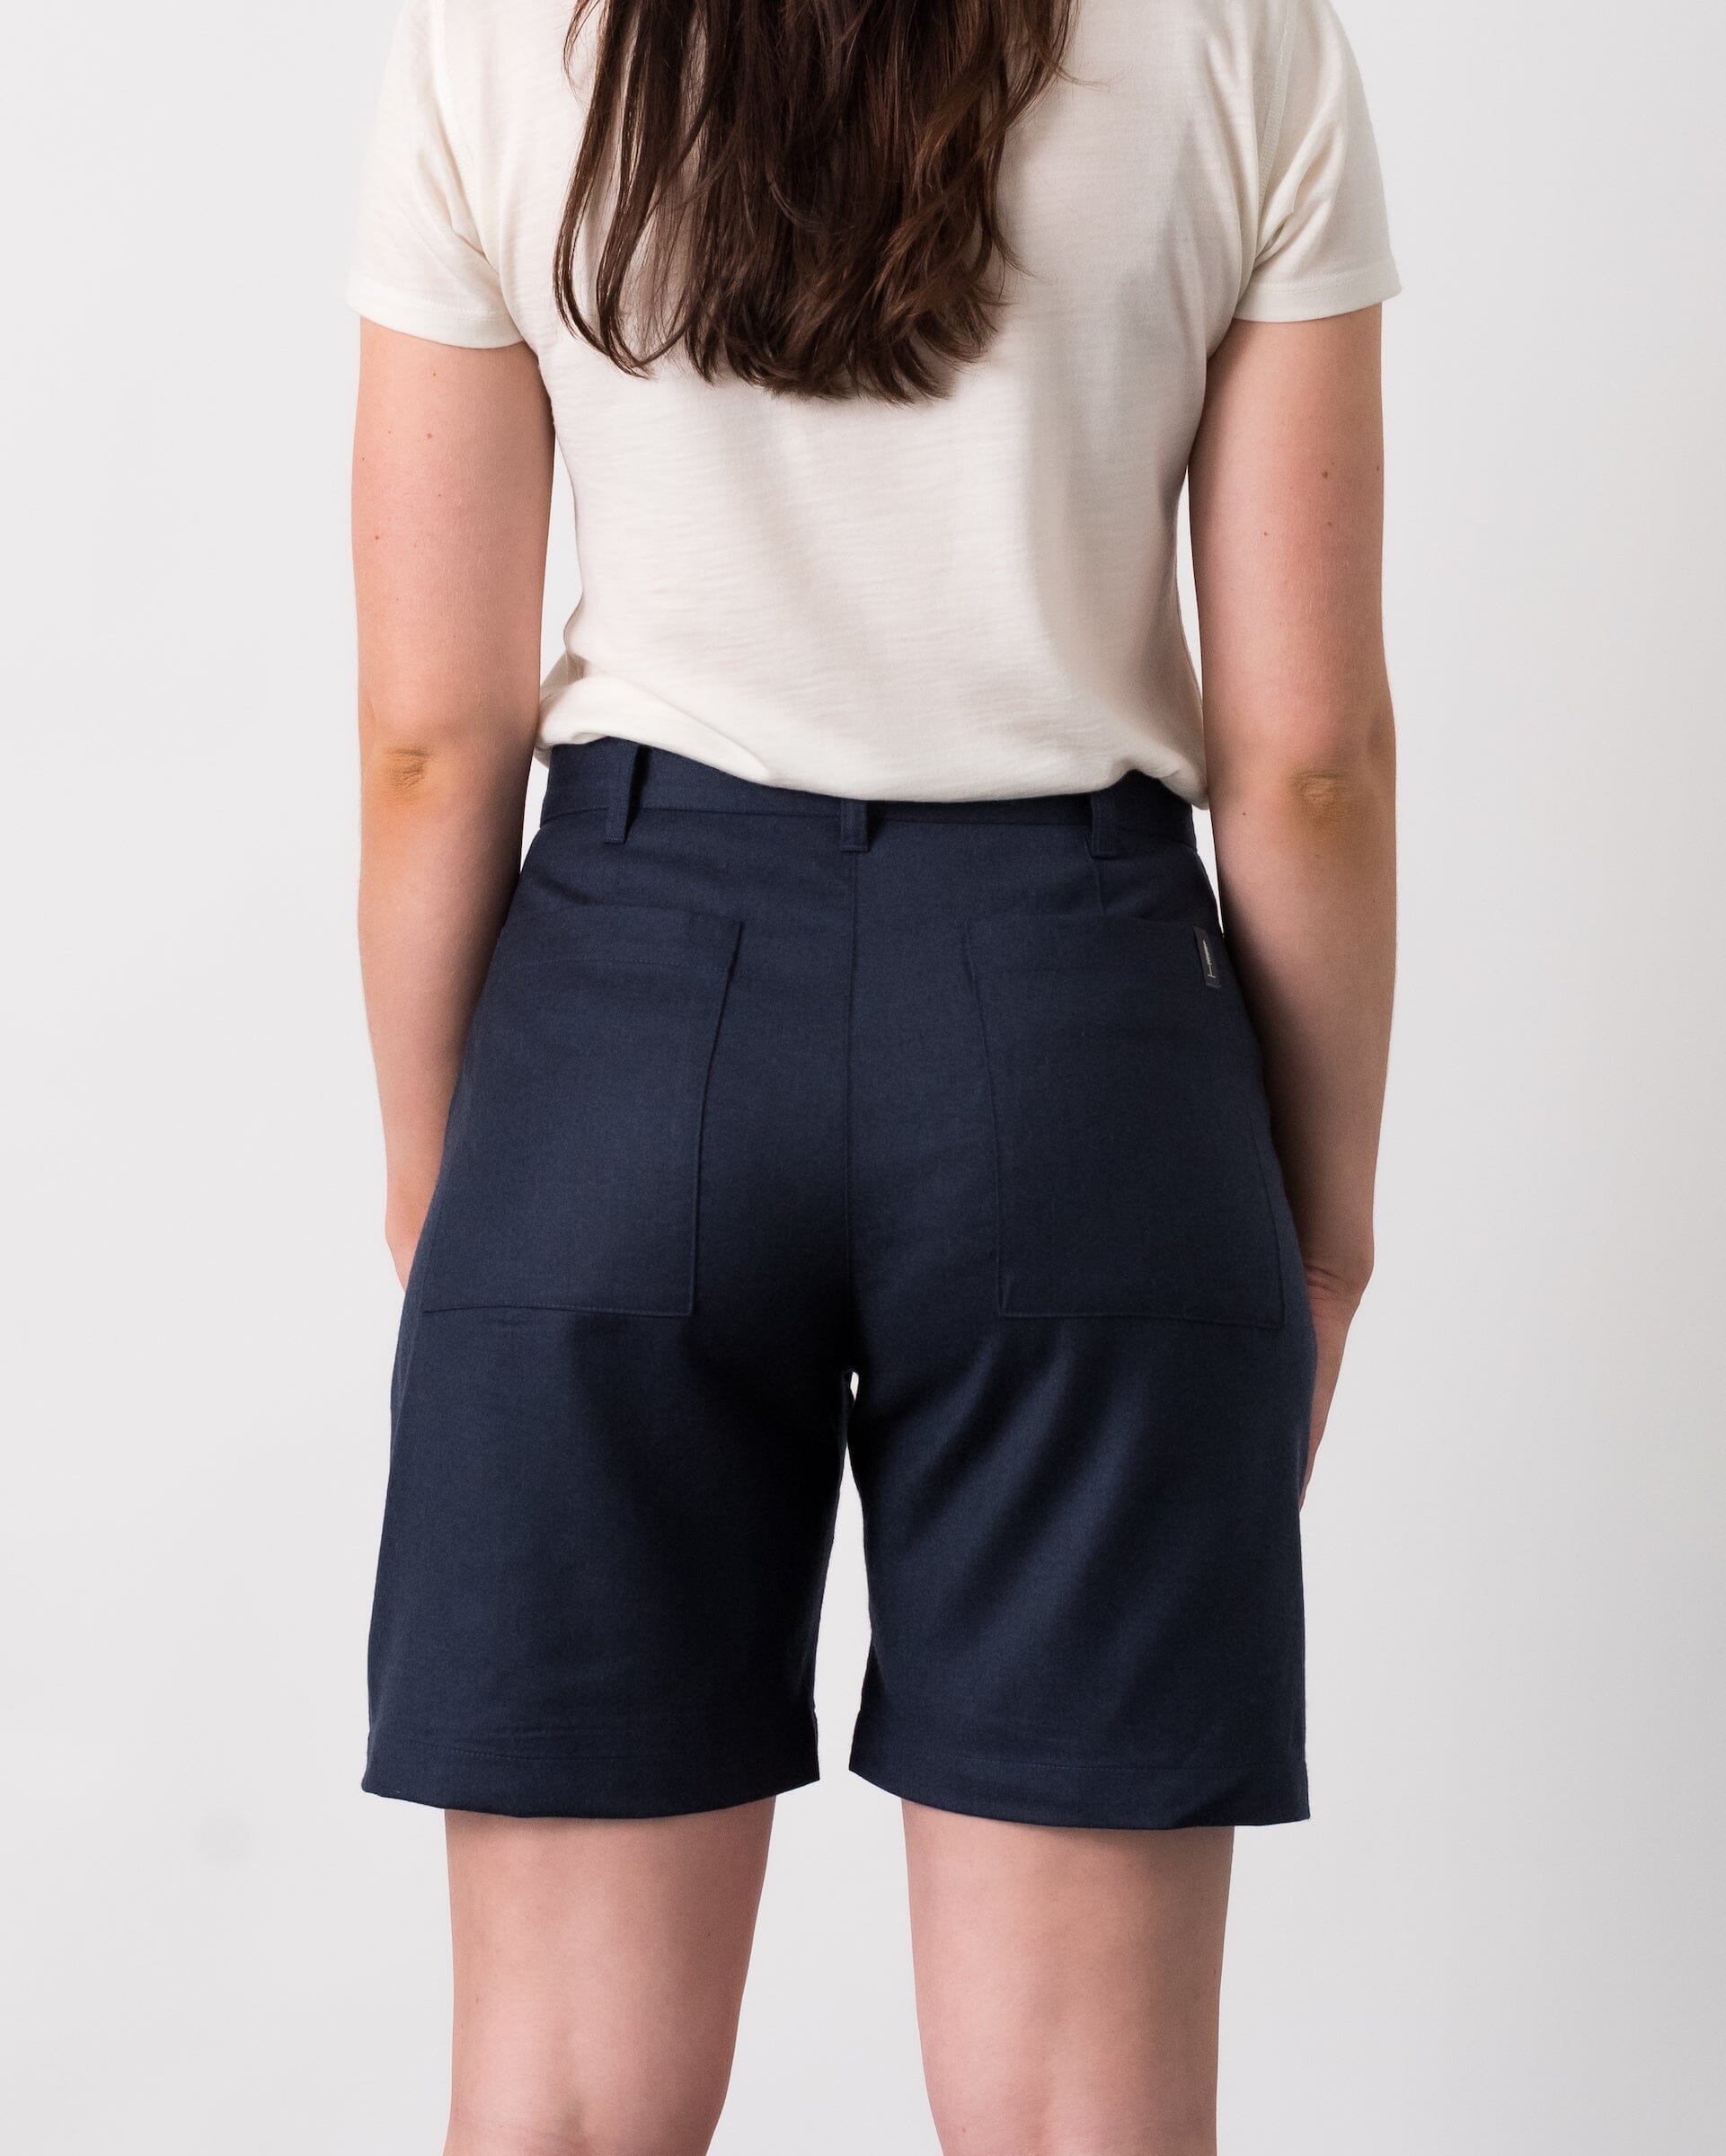 The Womens Light Wool Short in Heather Navy - Full Body 3 #color_heather navy